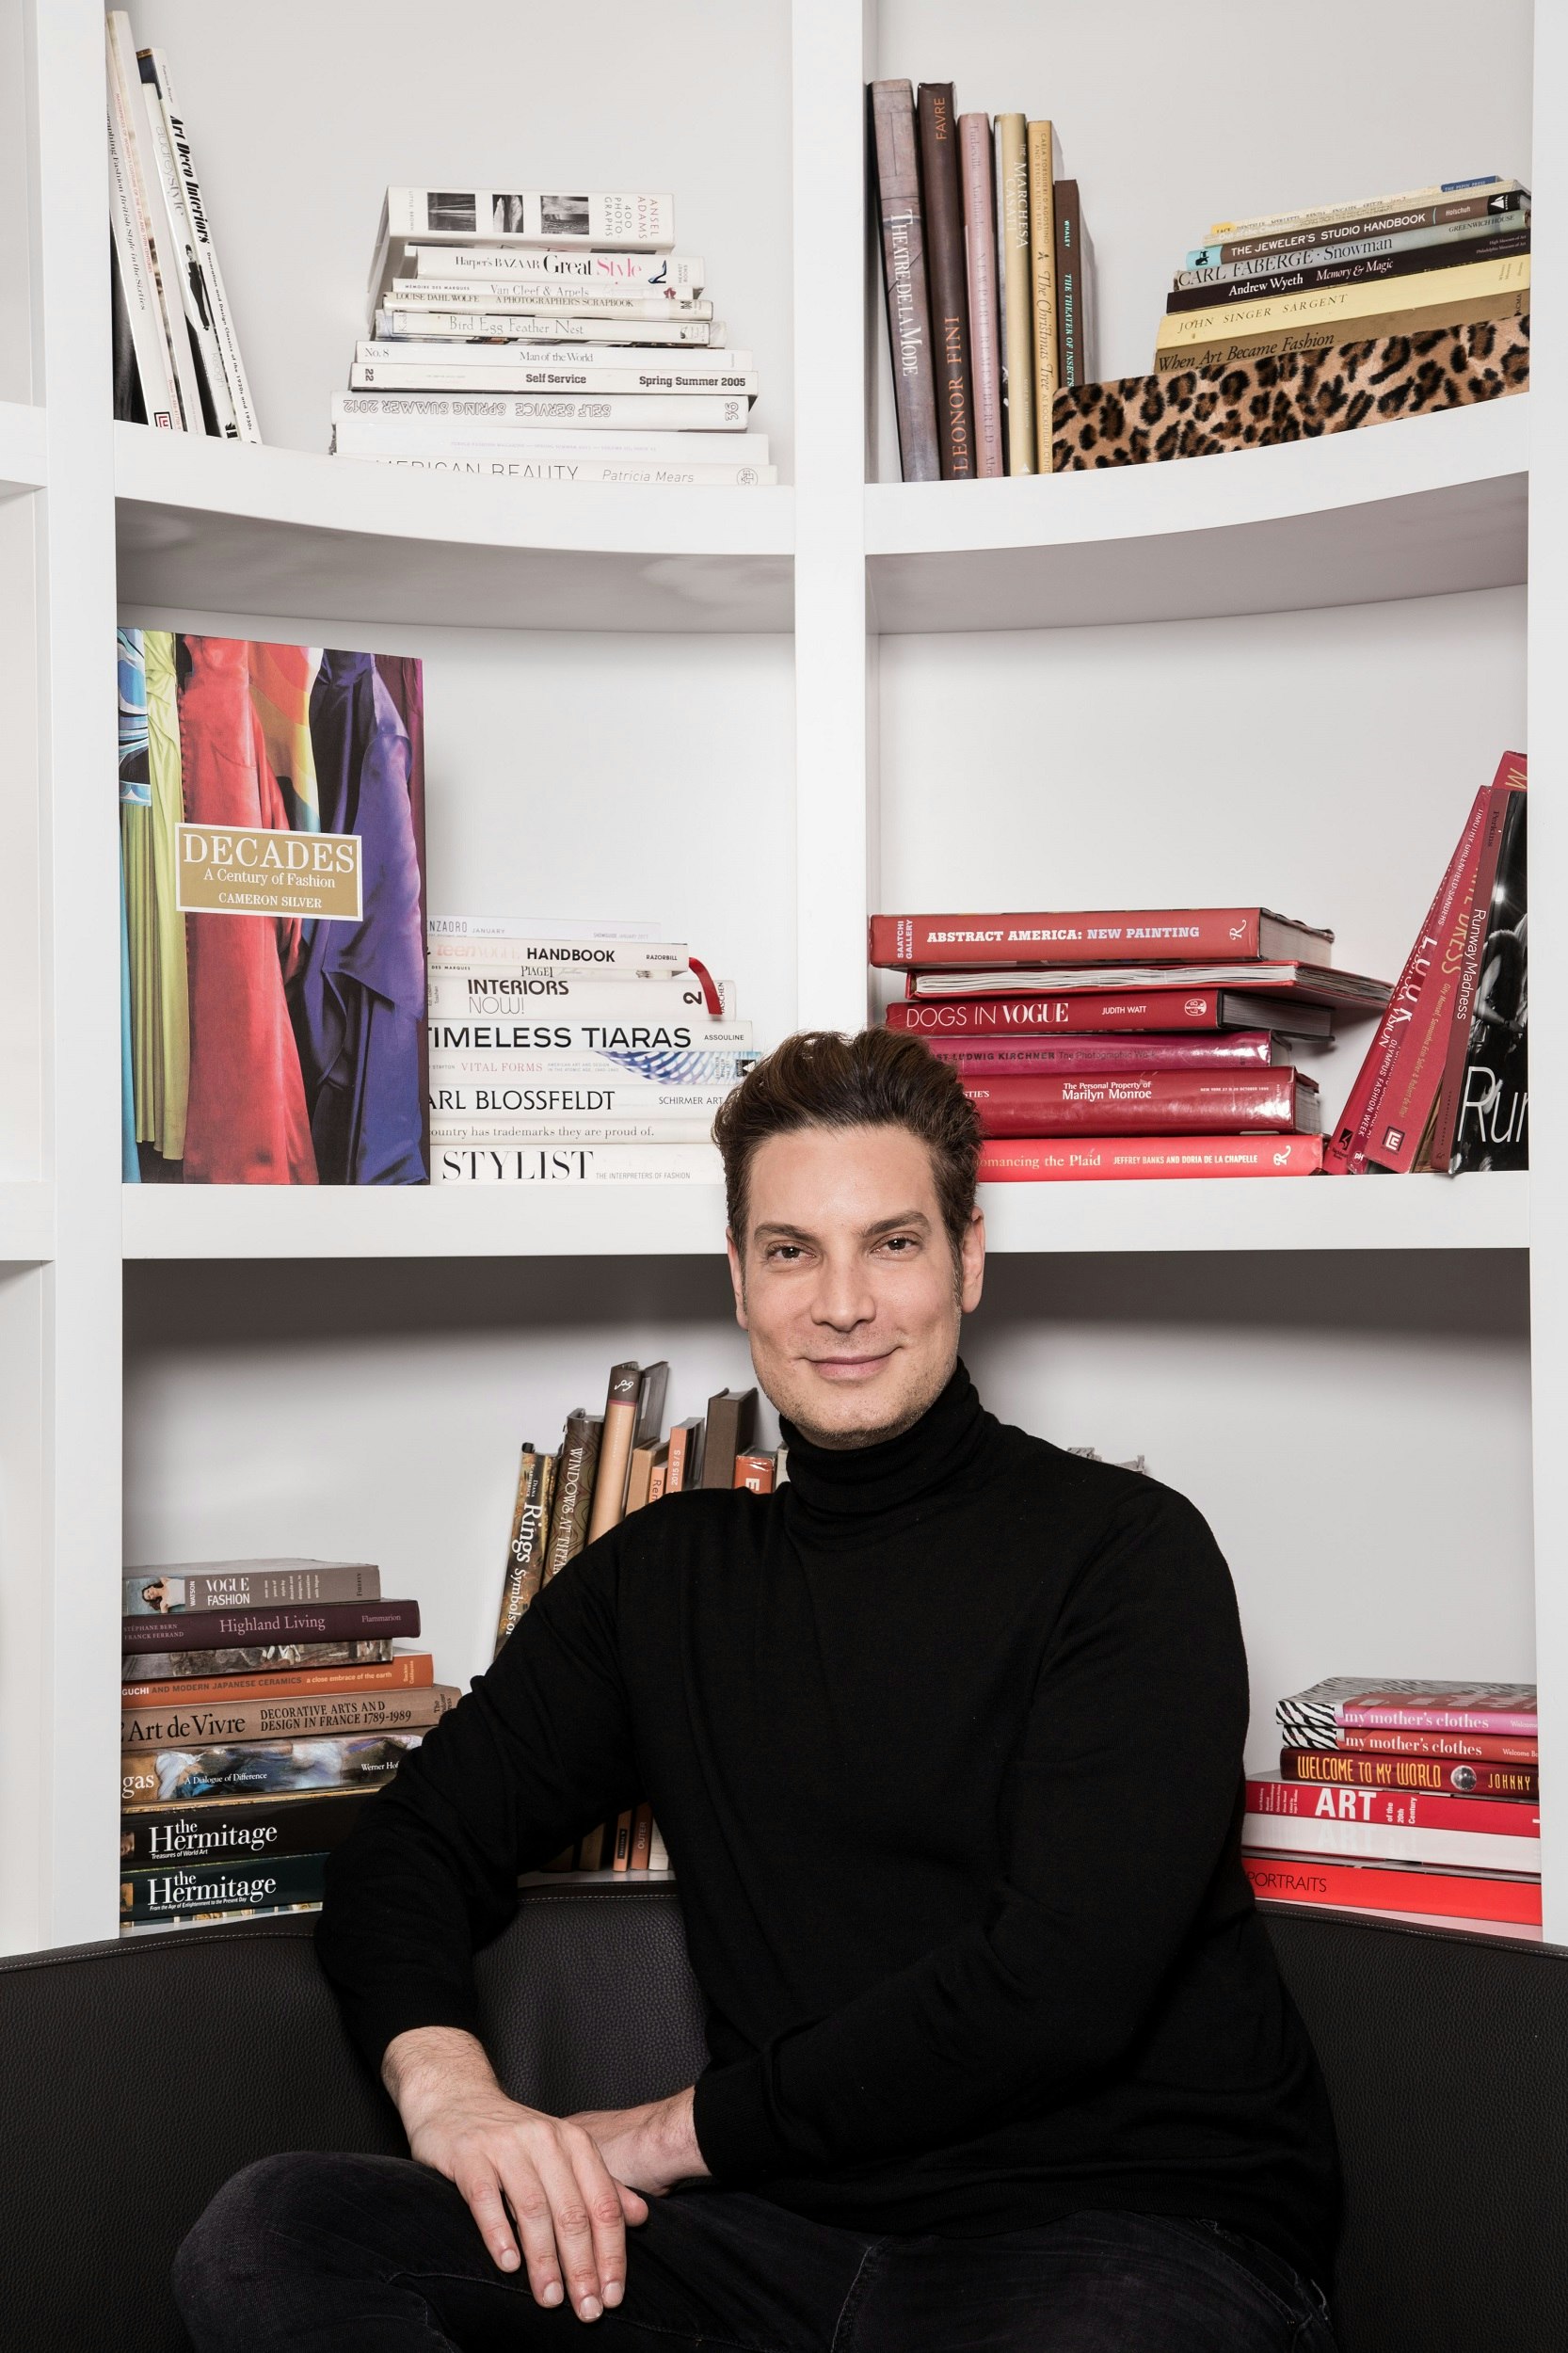 White man wearing a black round-neck top sits in front of a book shelf and smiles at the camera